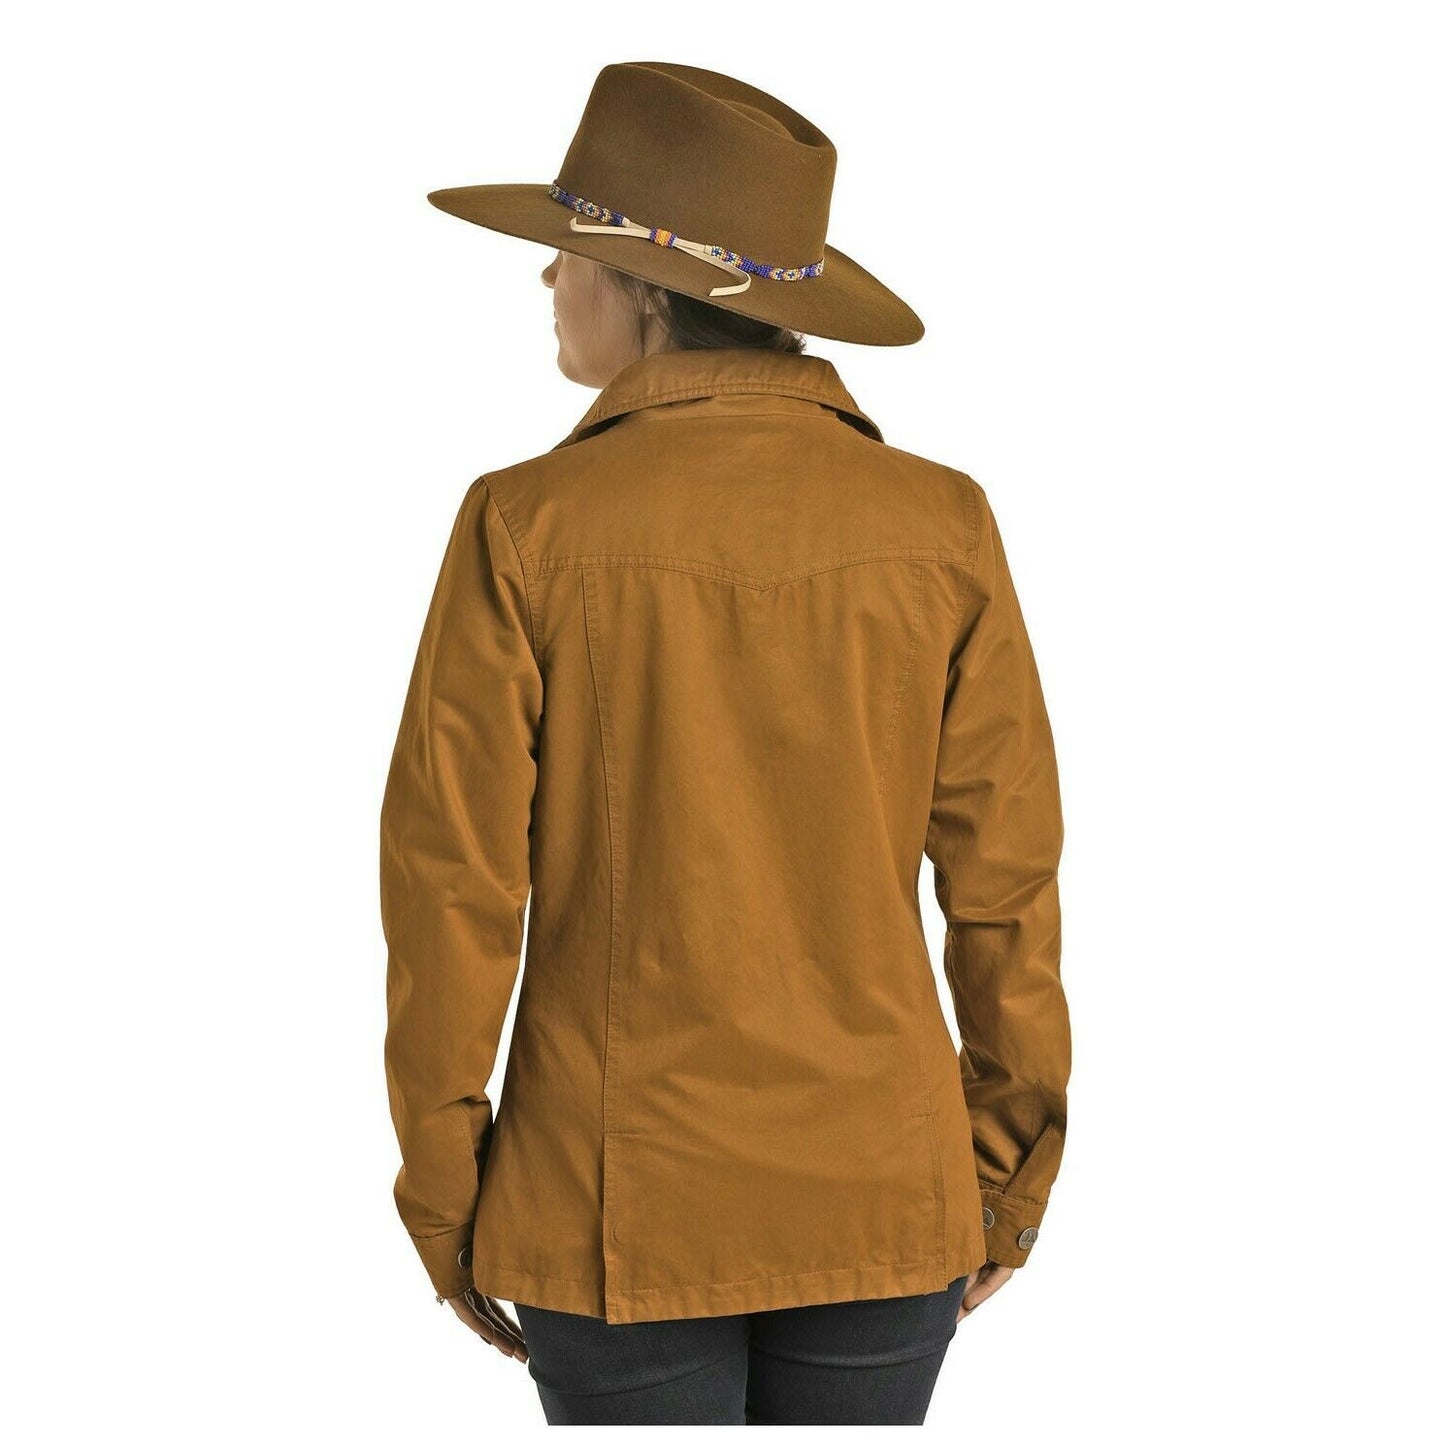 Powder River Outfitters Ladies Brass Rancher Jacket 52B6755-70